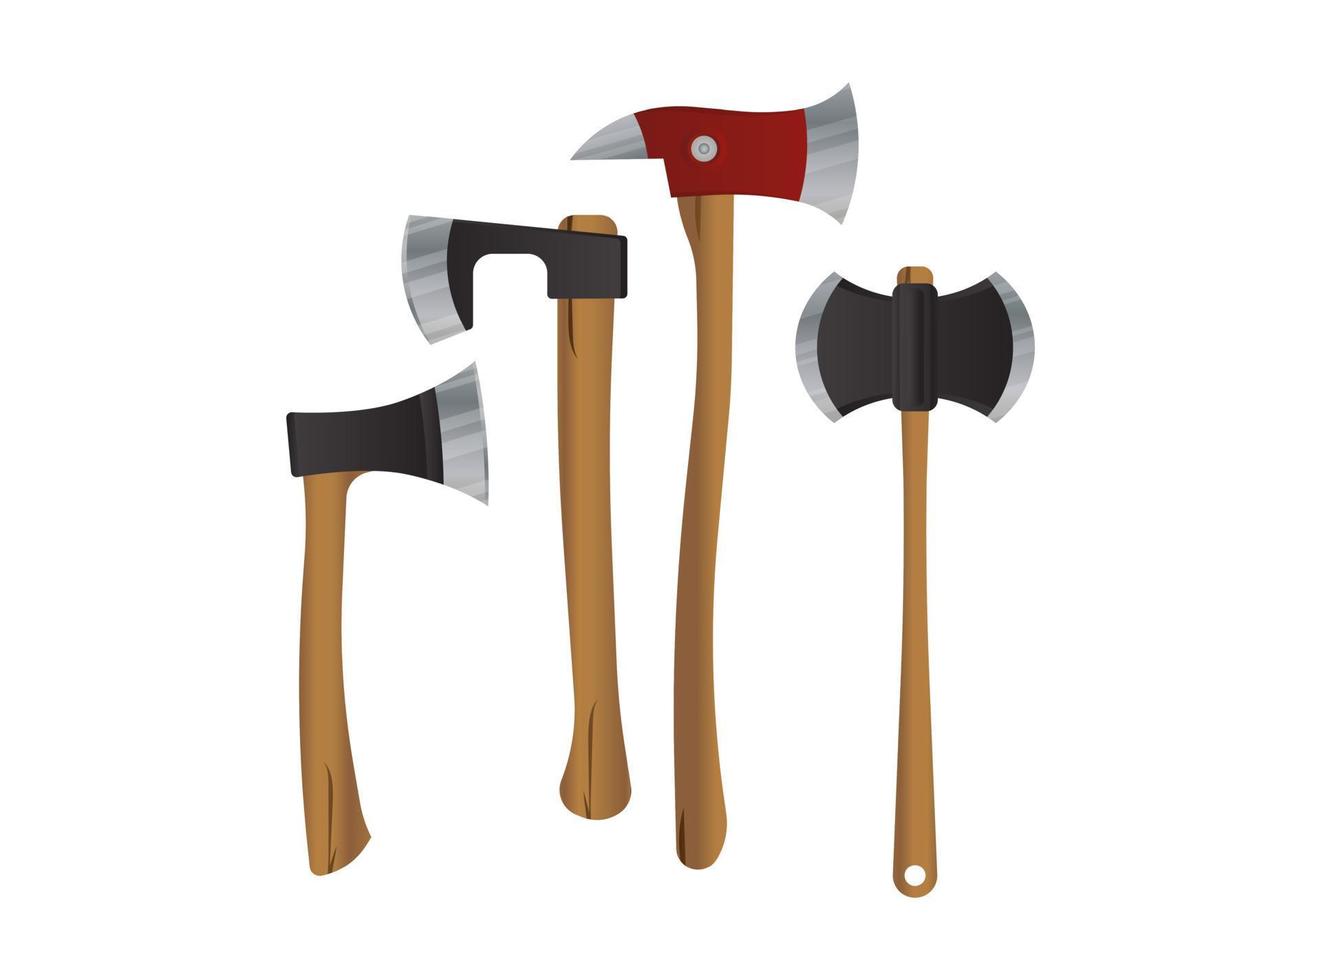 Different kinds of vector axes. Forester, fire, tourist ax and kitchen ax . Tools Collection. Realistic style.